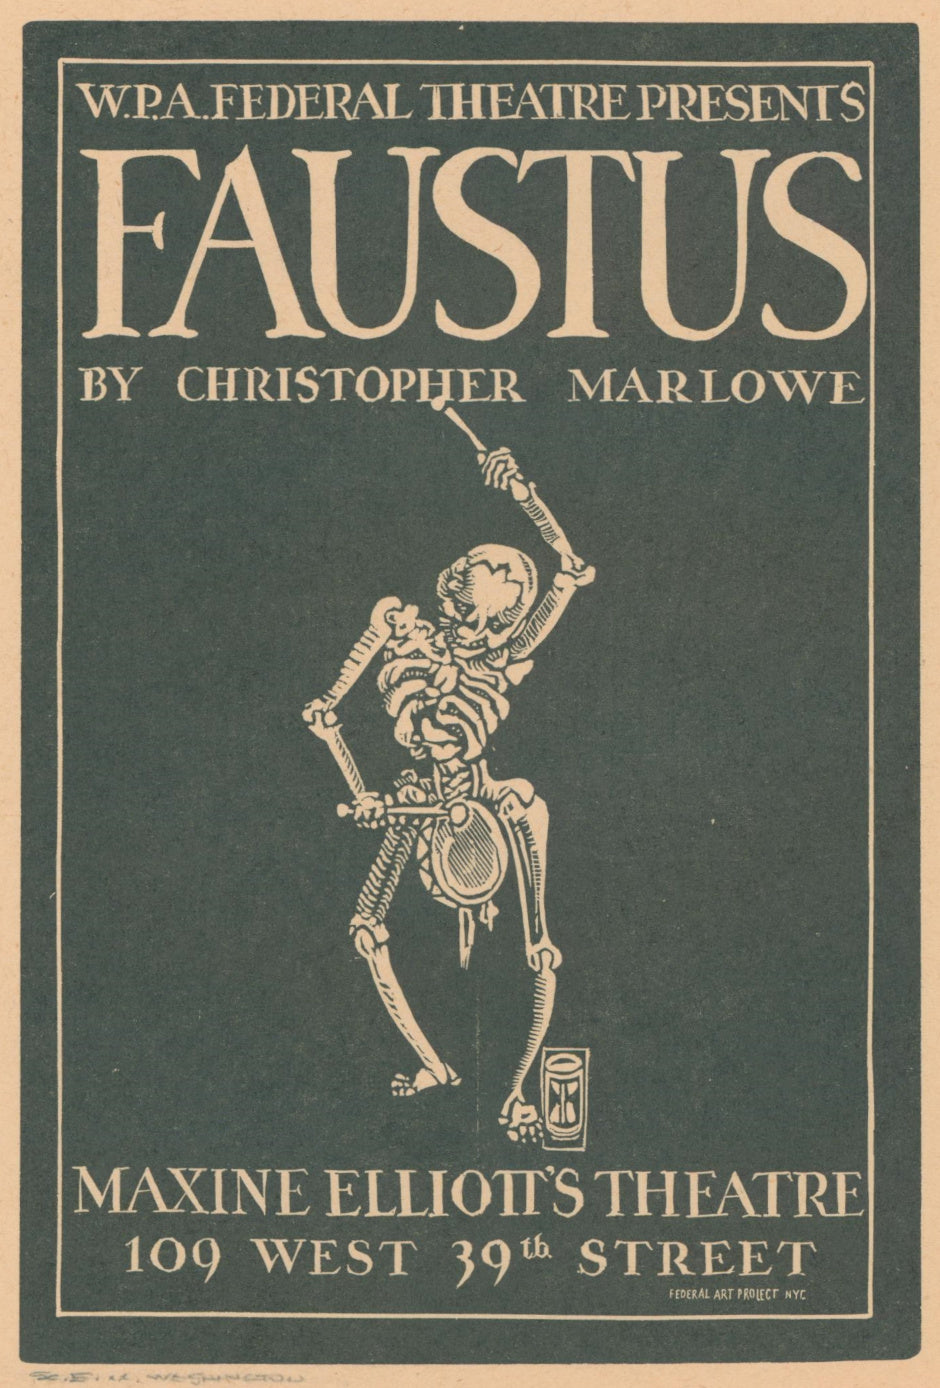 Unattributed  “W.P.A. Federal Theatre Presents Faustus by Christopher Marlowe”